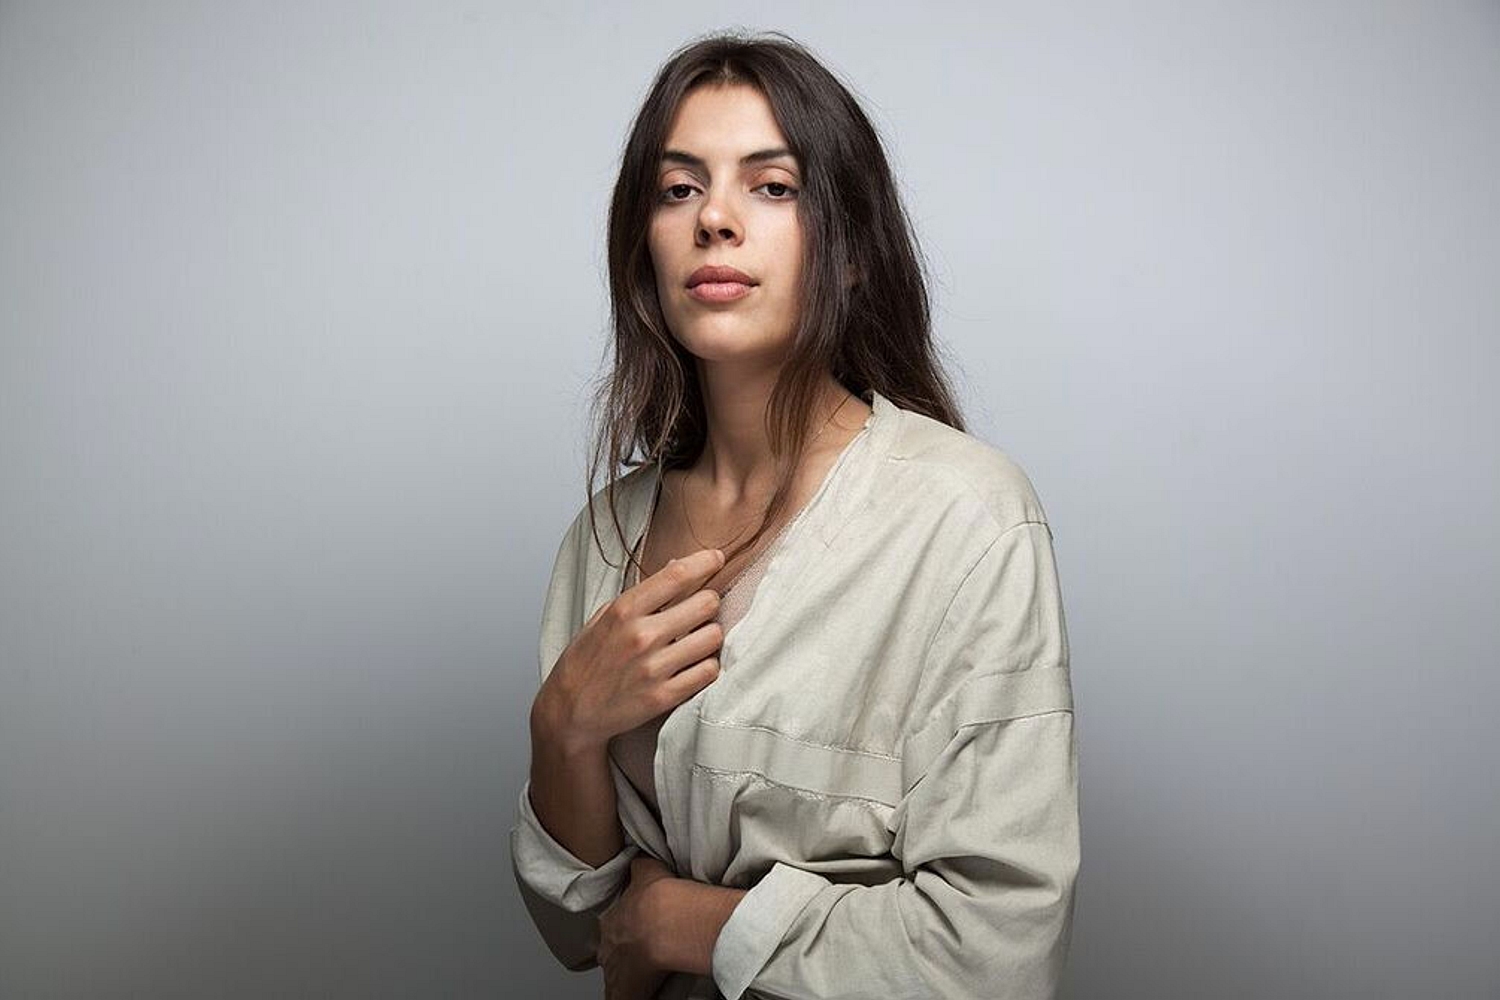 Julie Byrne is going on a UK tour in May